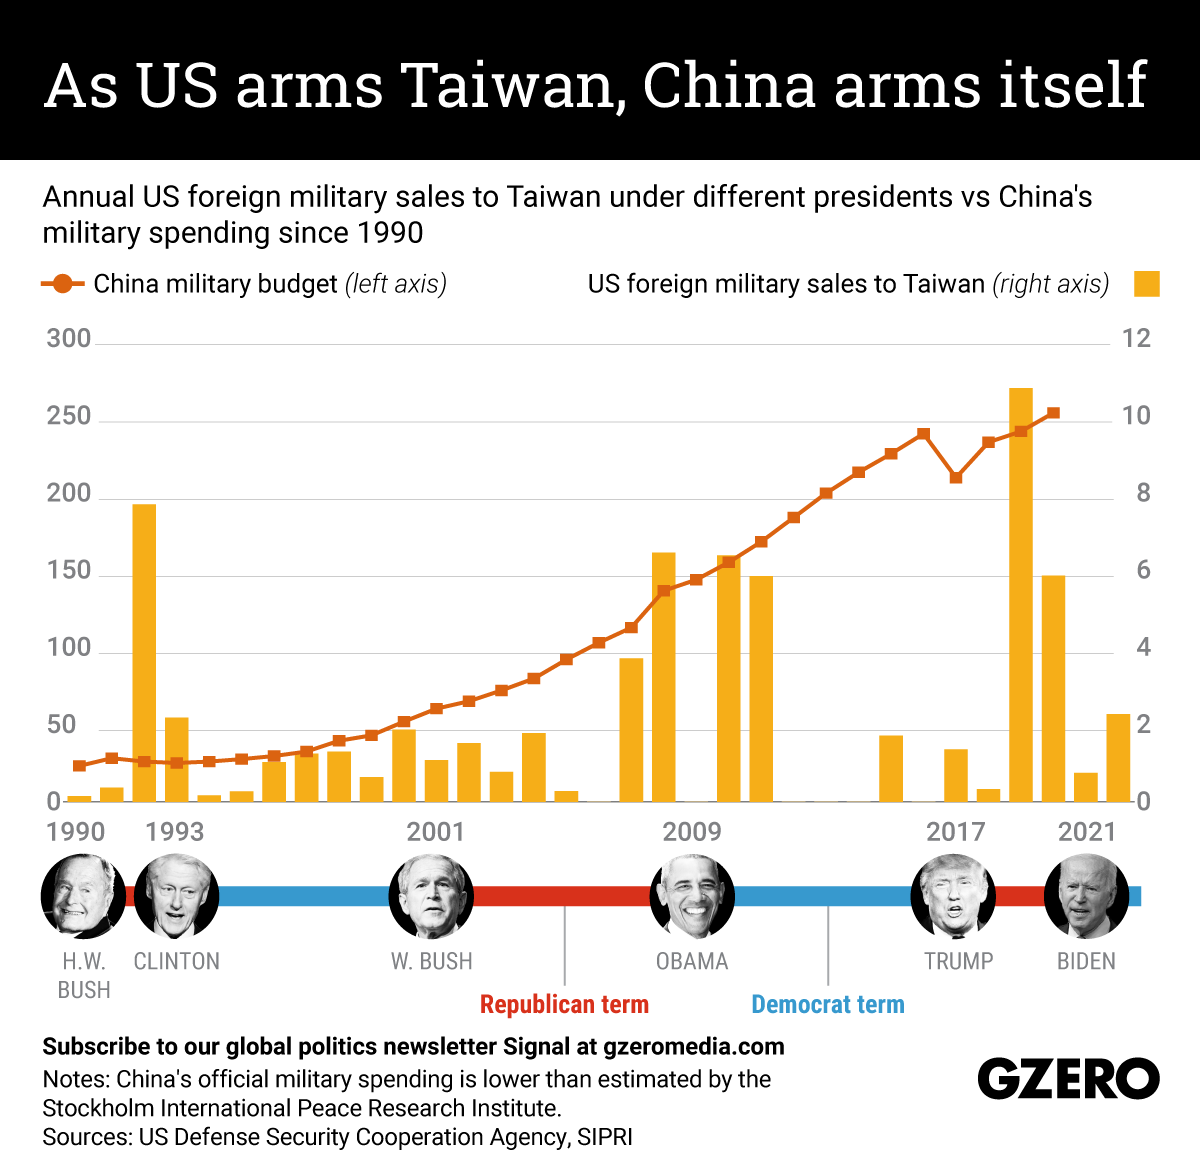 The Graphic Truth: As US arms Taiwan, China arms itself